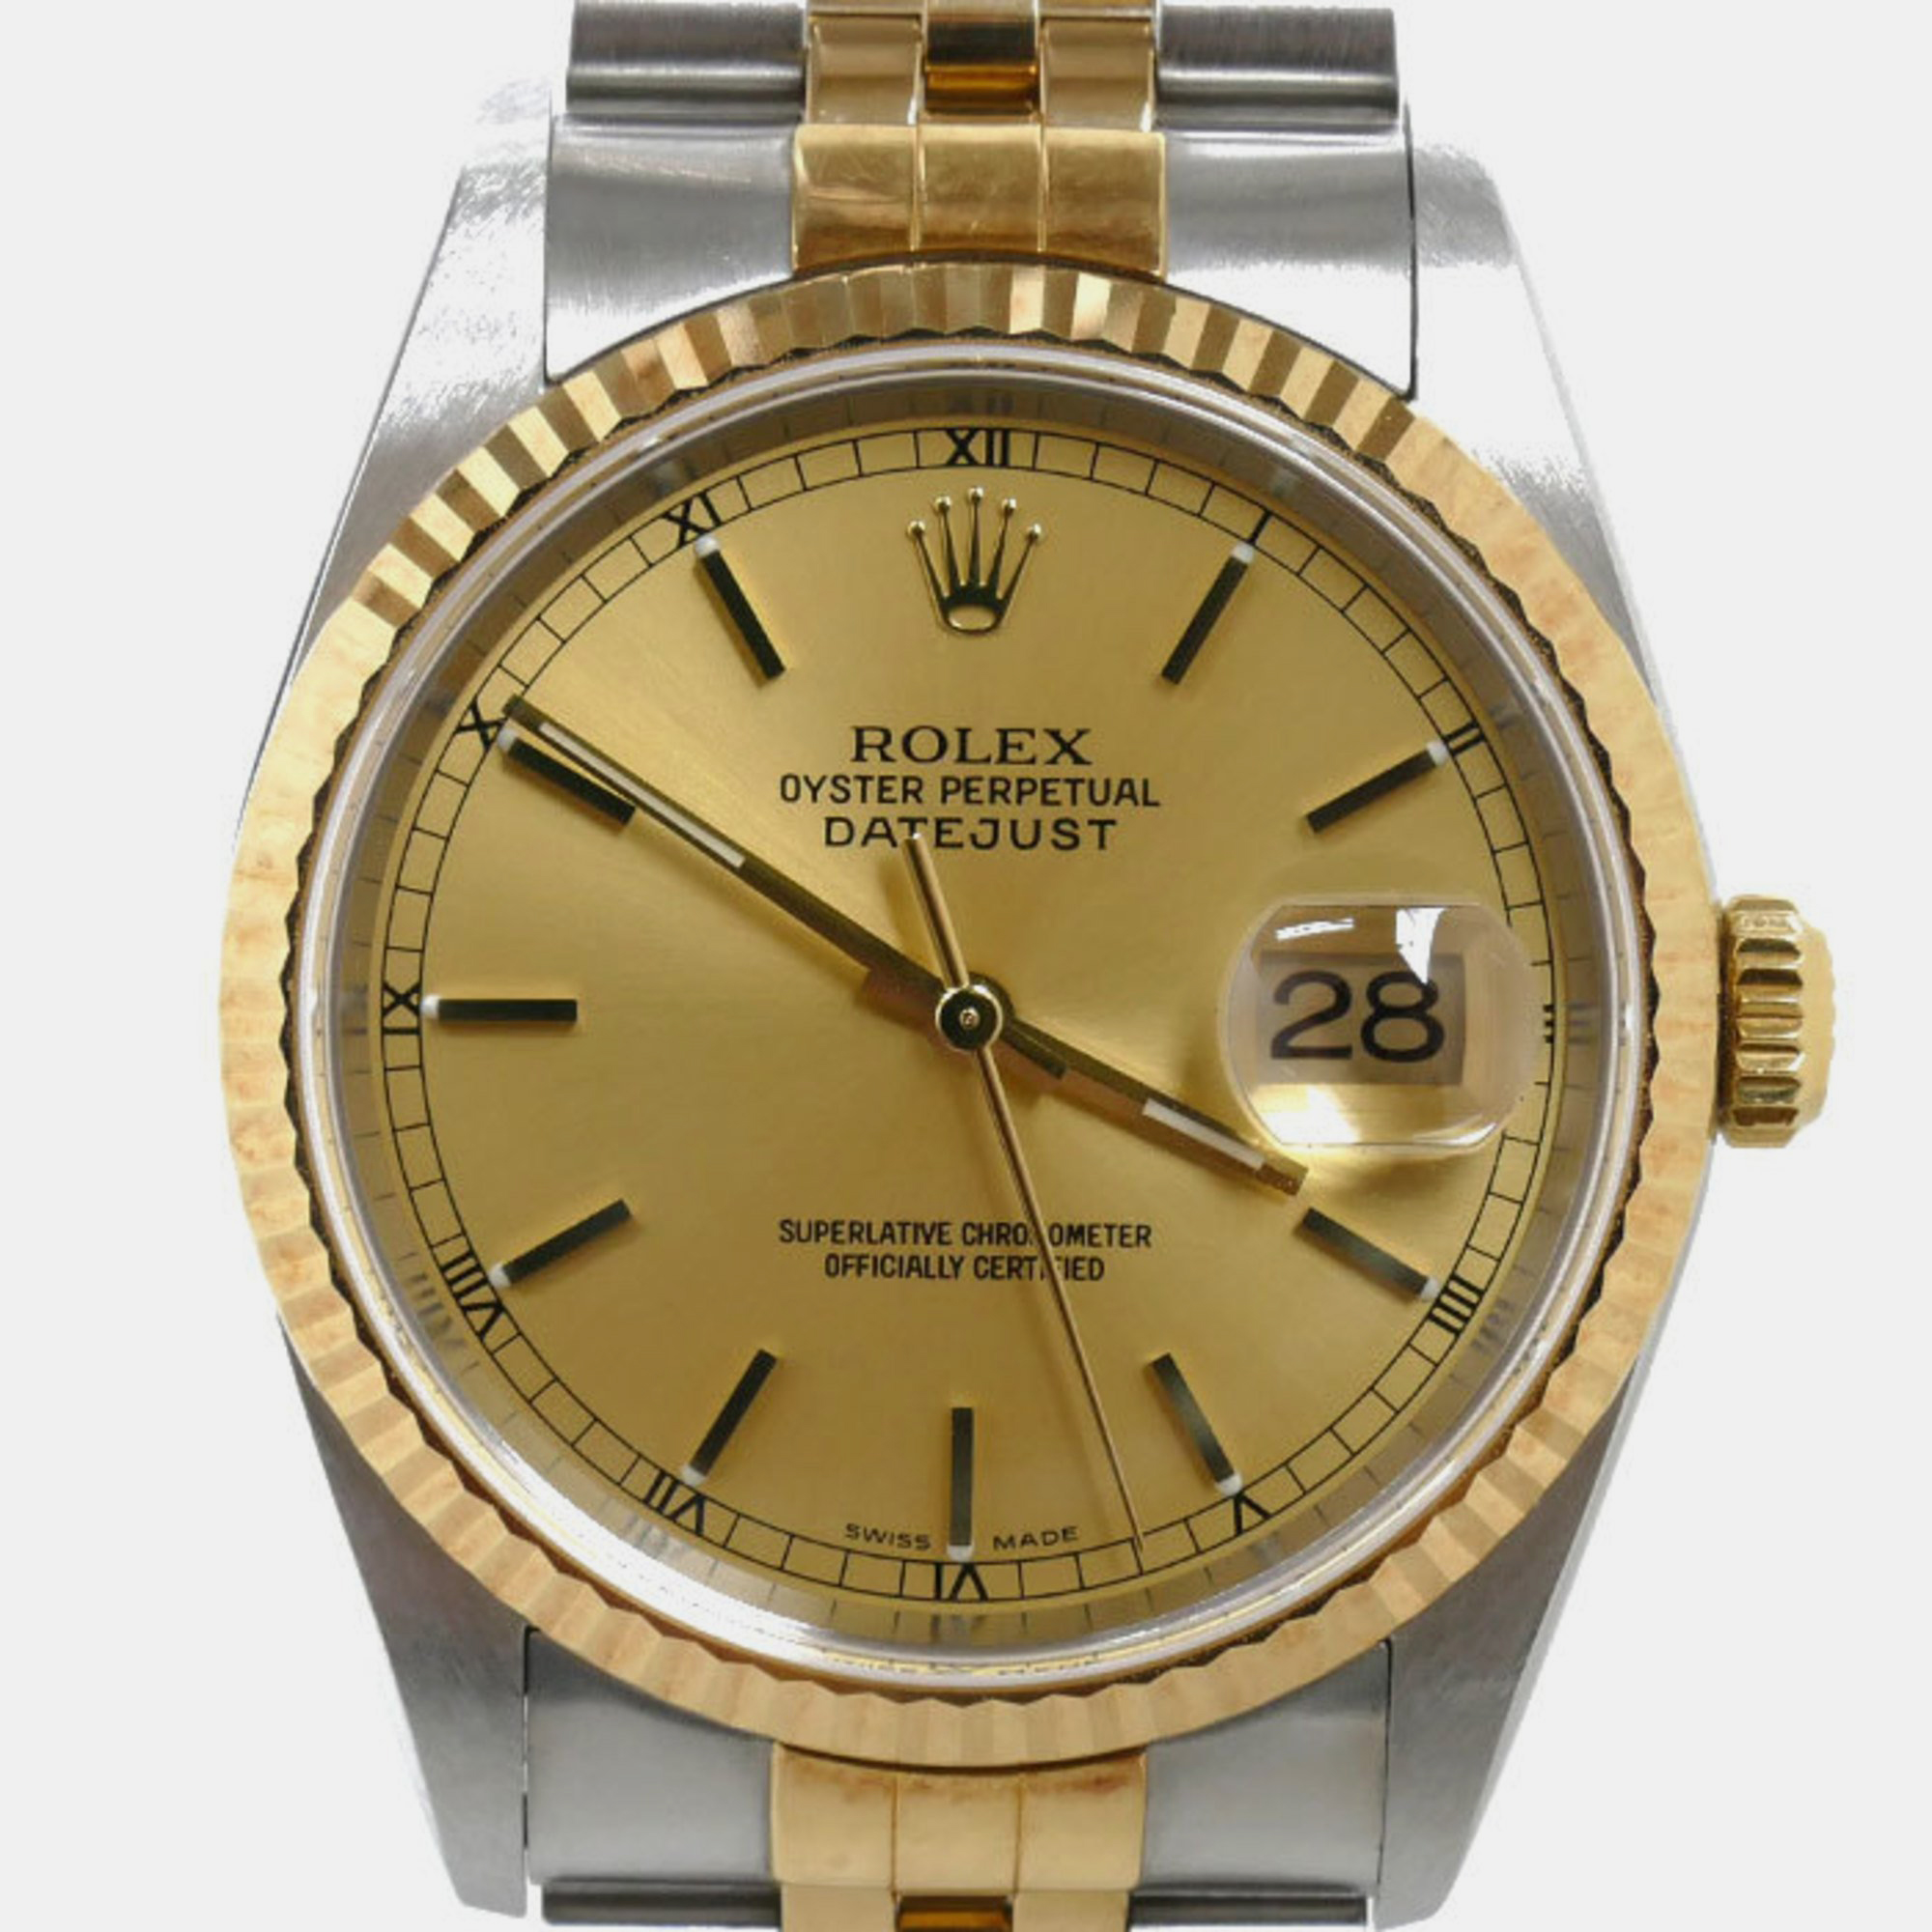 Rolex champagne 18k yellow gold stainless steel datejust 16233 automatic men's wristwatch 36 mm